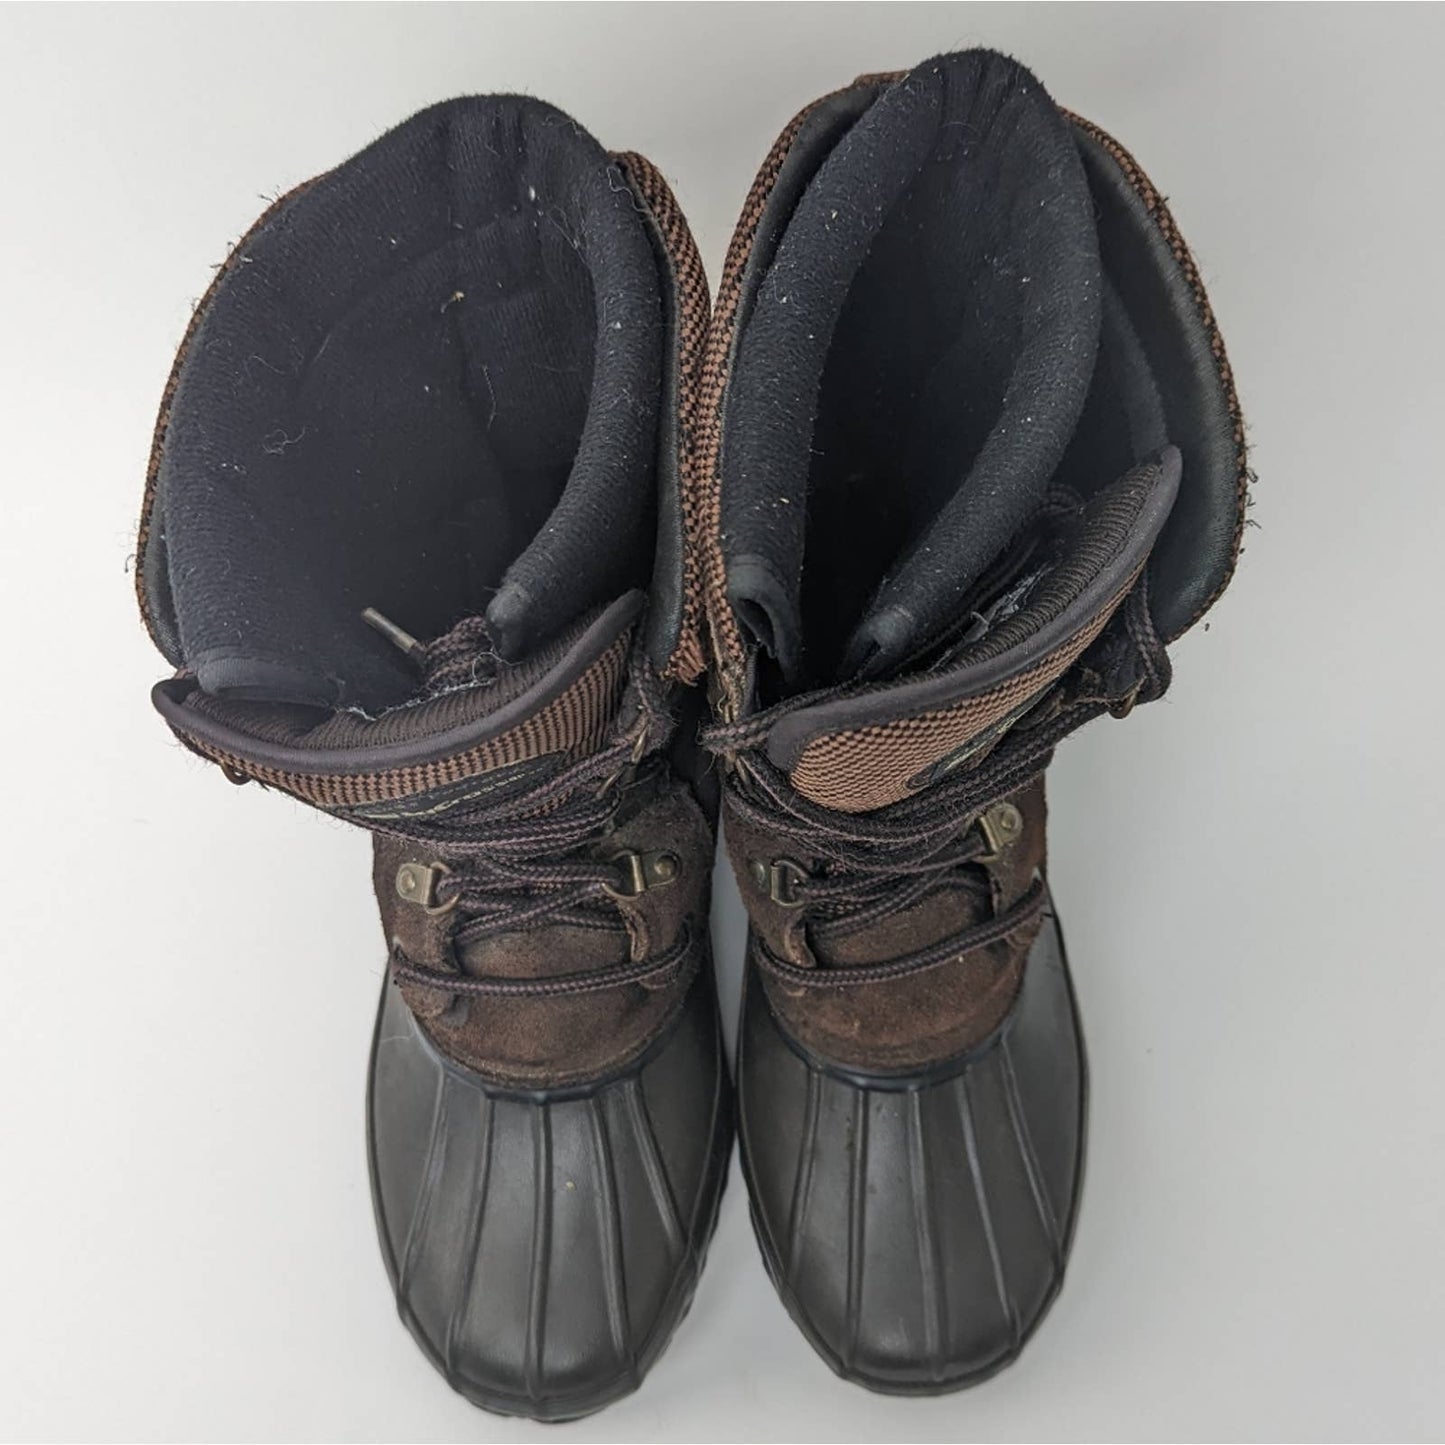 LaCrosse Thinsulate Leather Hunting Duck Boots - 6